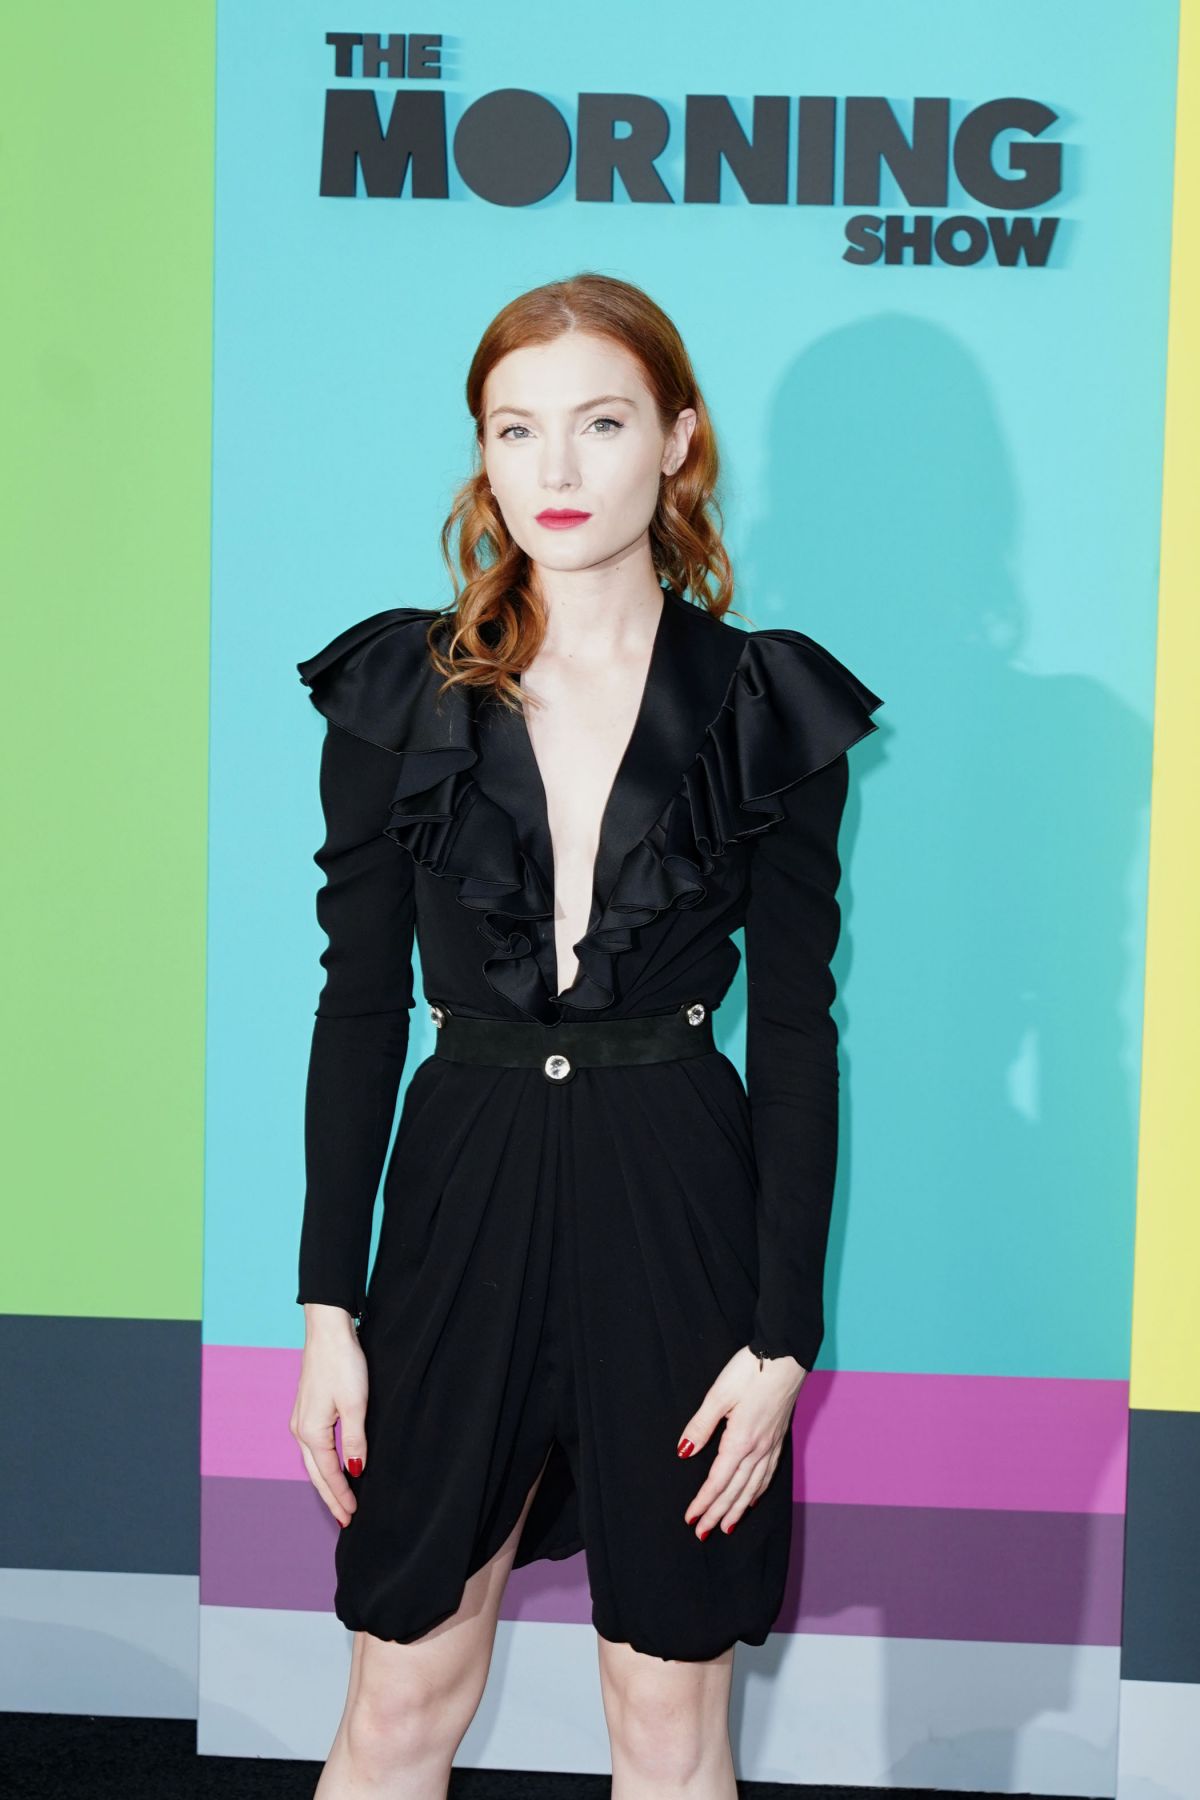 SKYLER SAMUELS at The Morning Show Premiere in New York 10/28/2019.